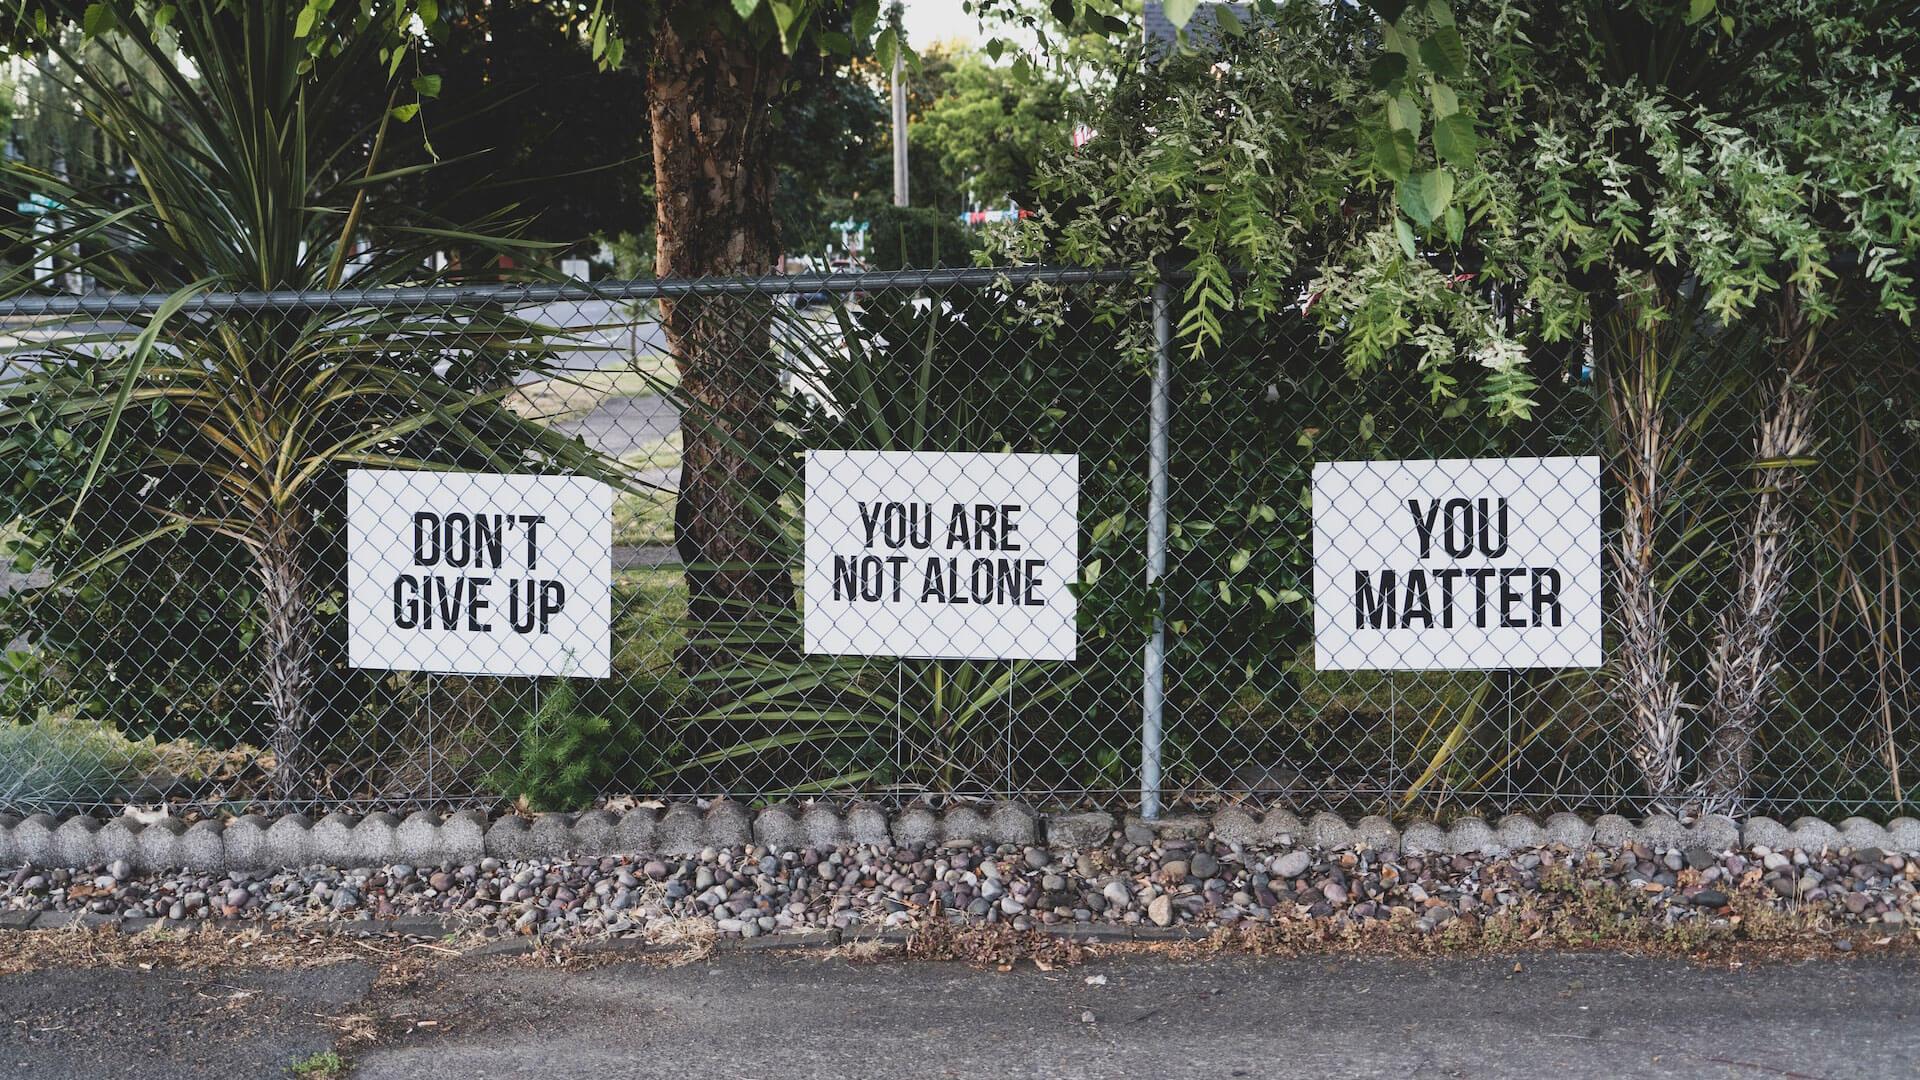 cartaz presos a cerca com as frases: "Don't Give Up"; "You are not alone"; "You matter".